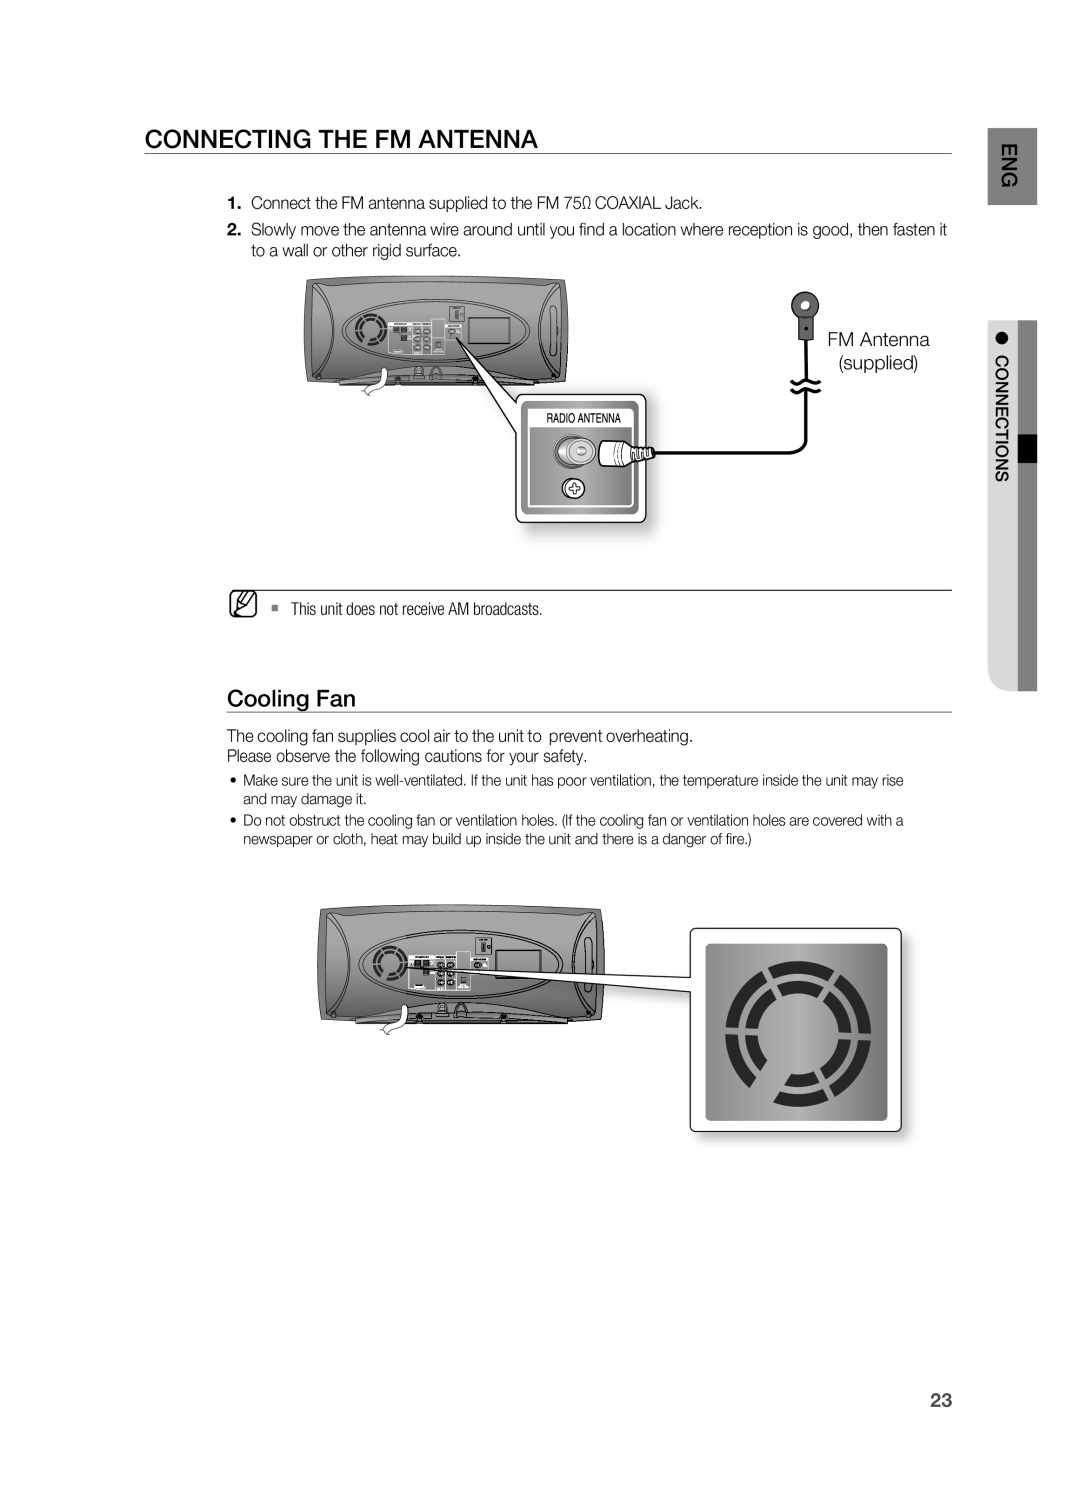 Samsung HT-A100 user manual Connecting the FM Antenna, Cooling Fan 